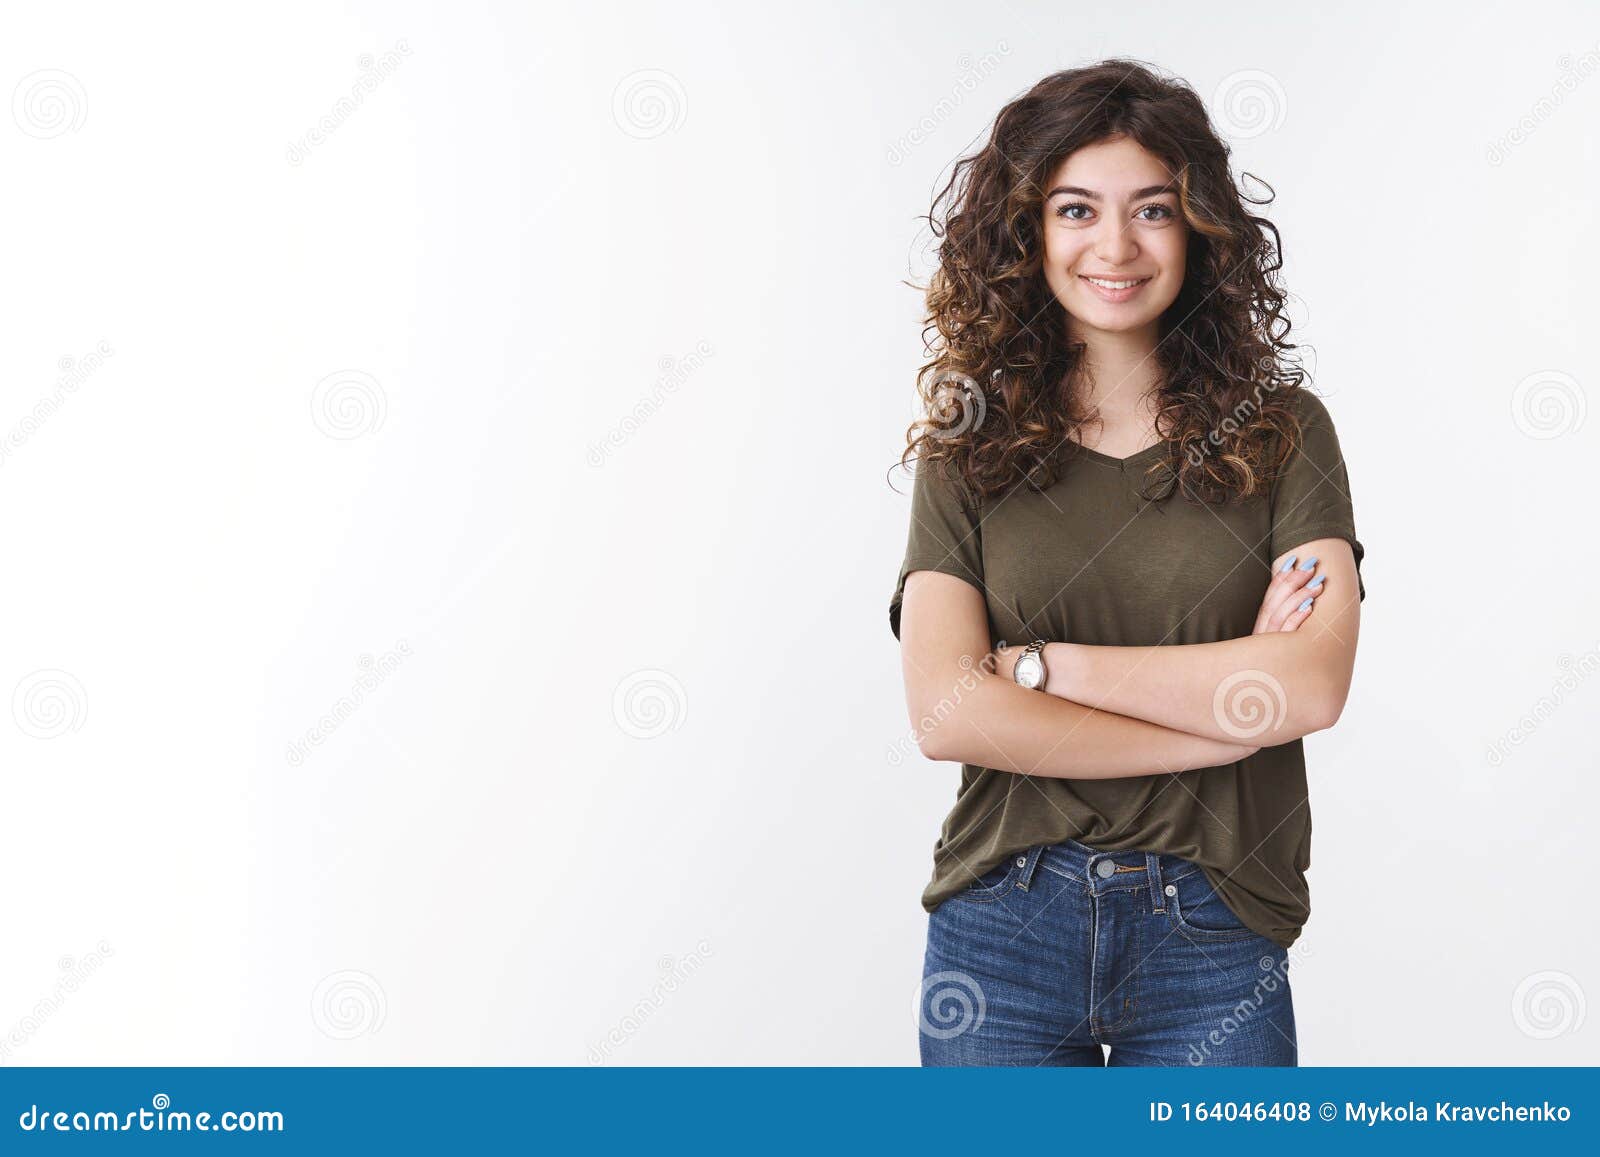 cute confident successful young female diatologist with curly hair cross arms chest self-assured ready give helpful